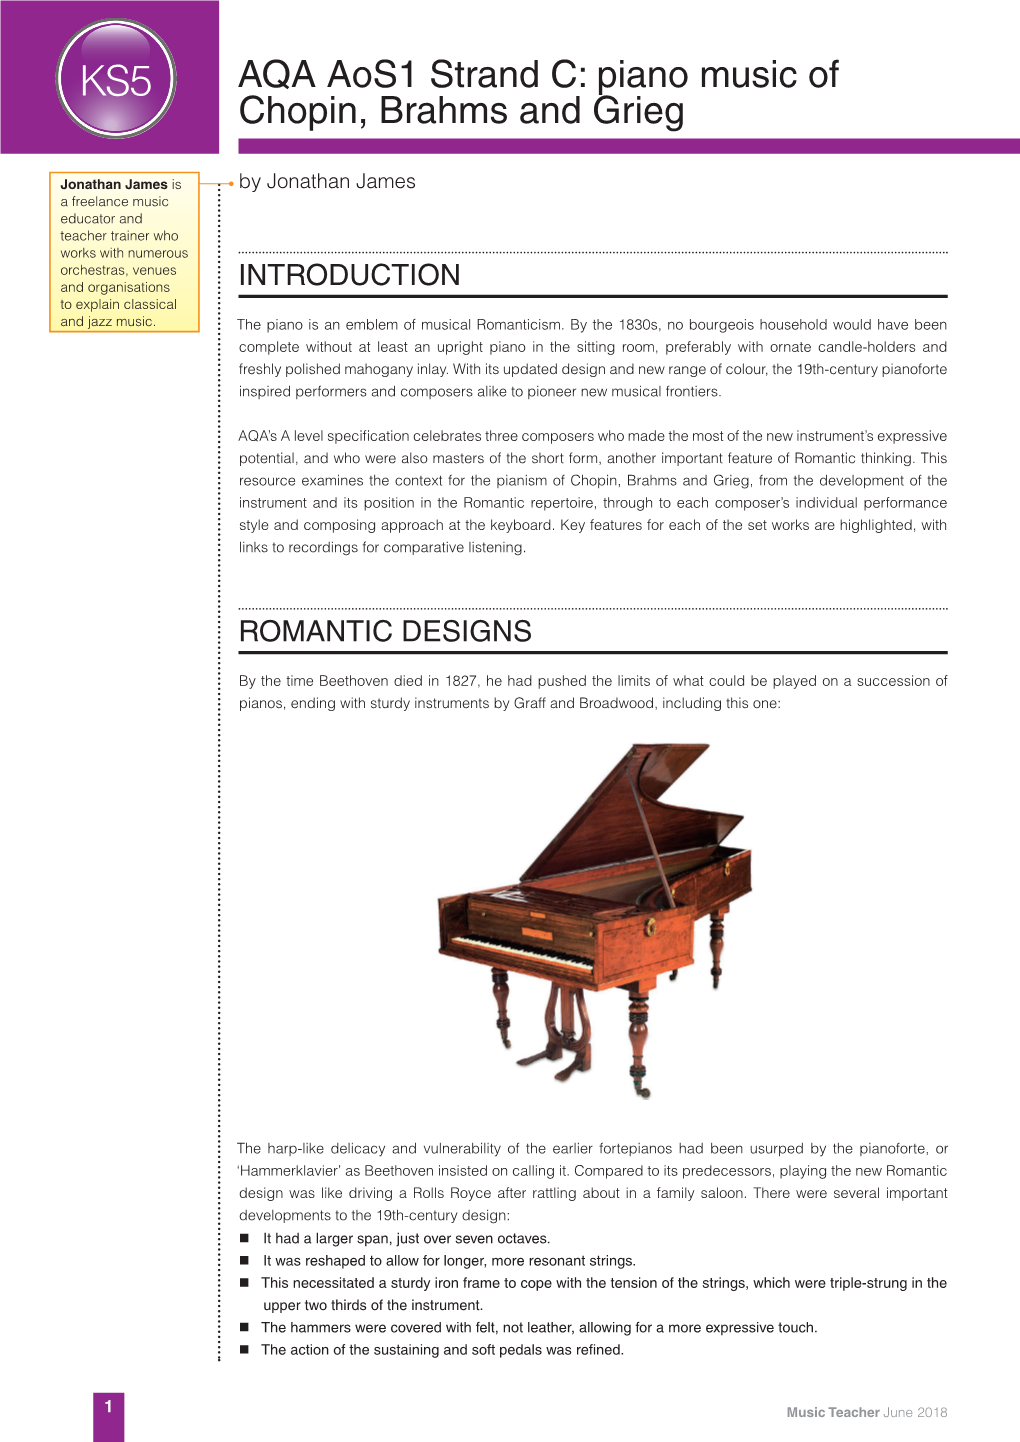 AQA Aos1 Strand C: Piano Music of Chopin, Brahms and Grieg